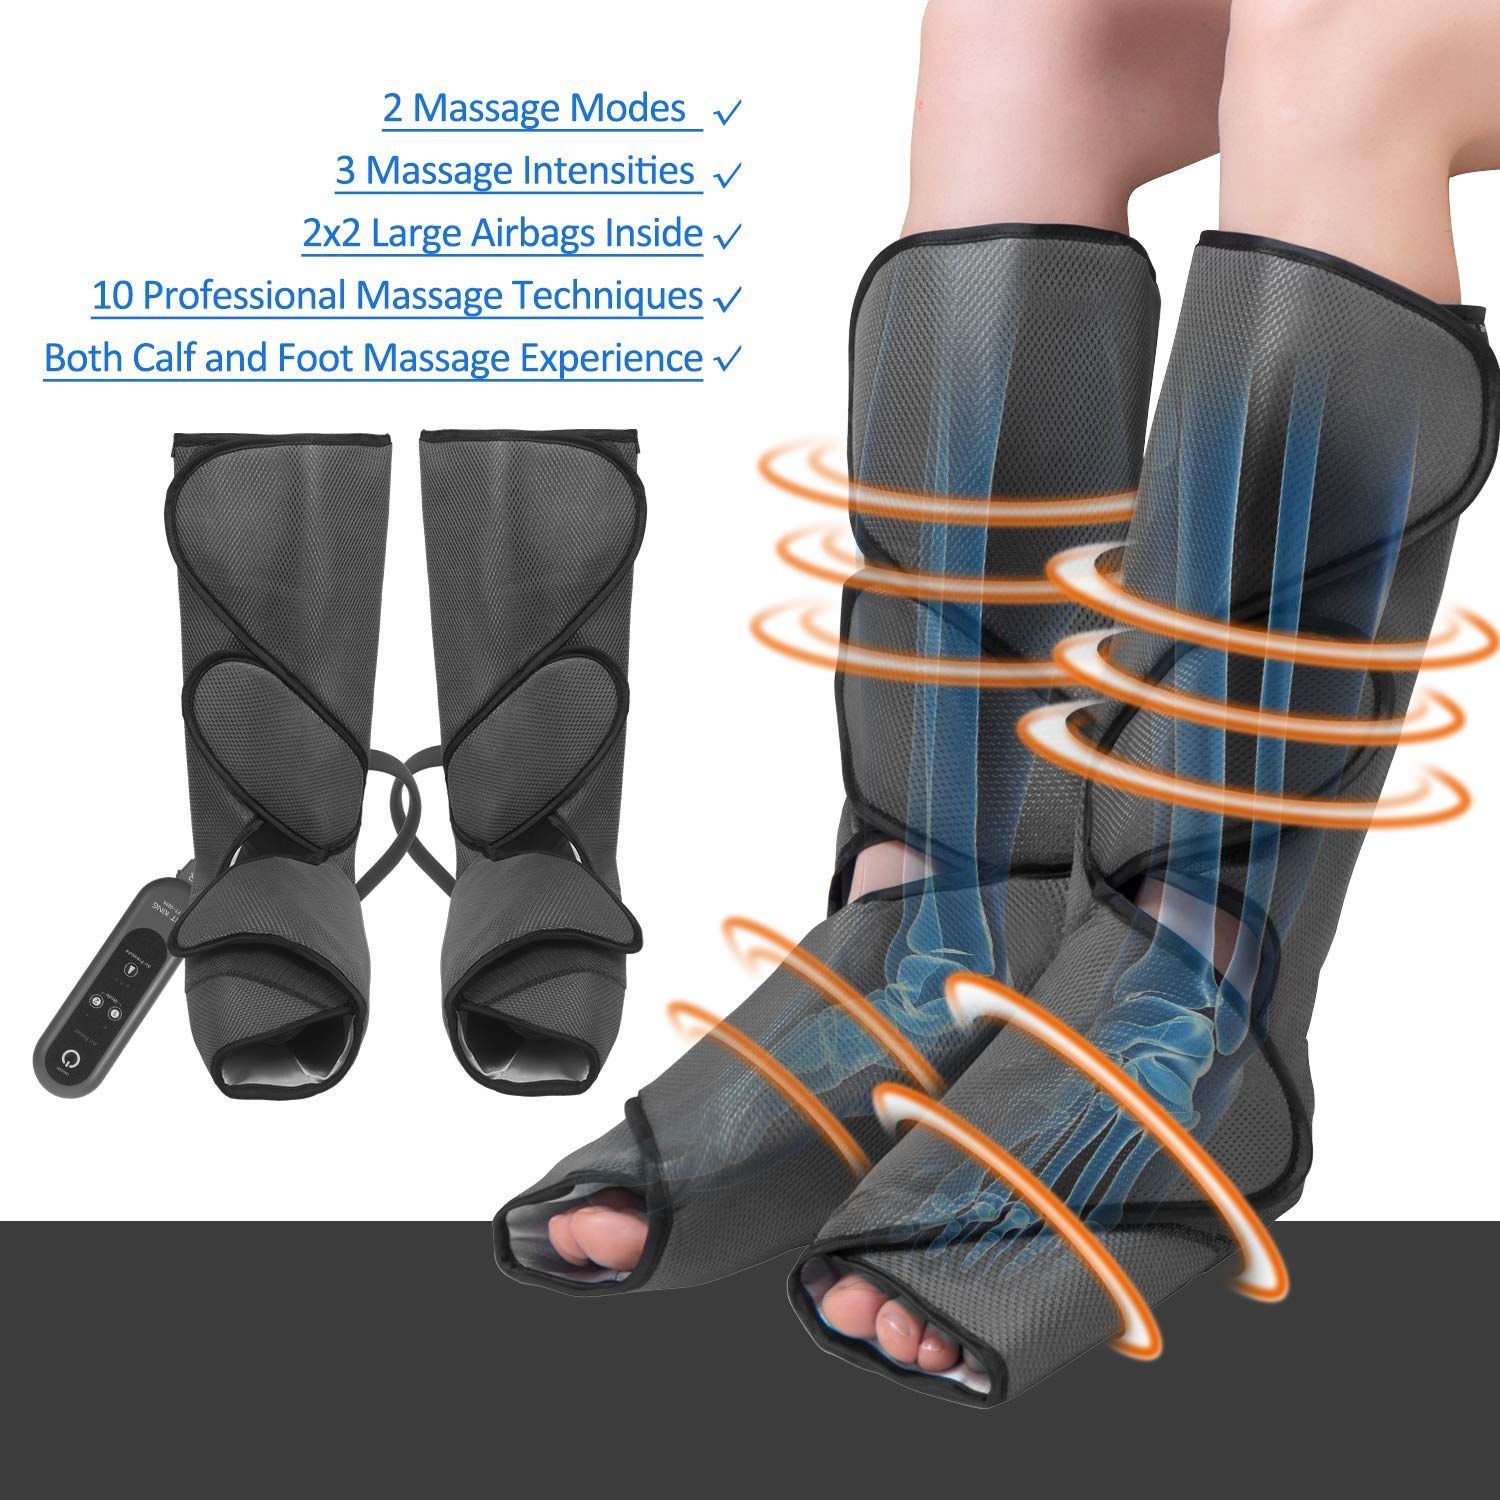 FIT KING Leg Air Massager for Circulation and Relaxation